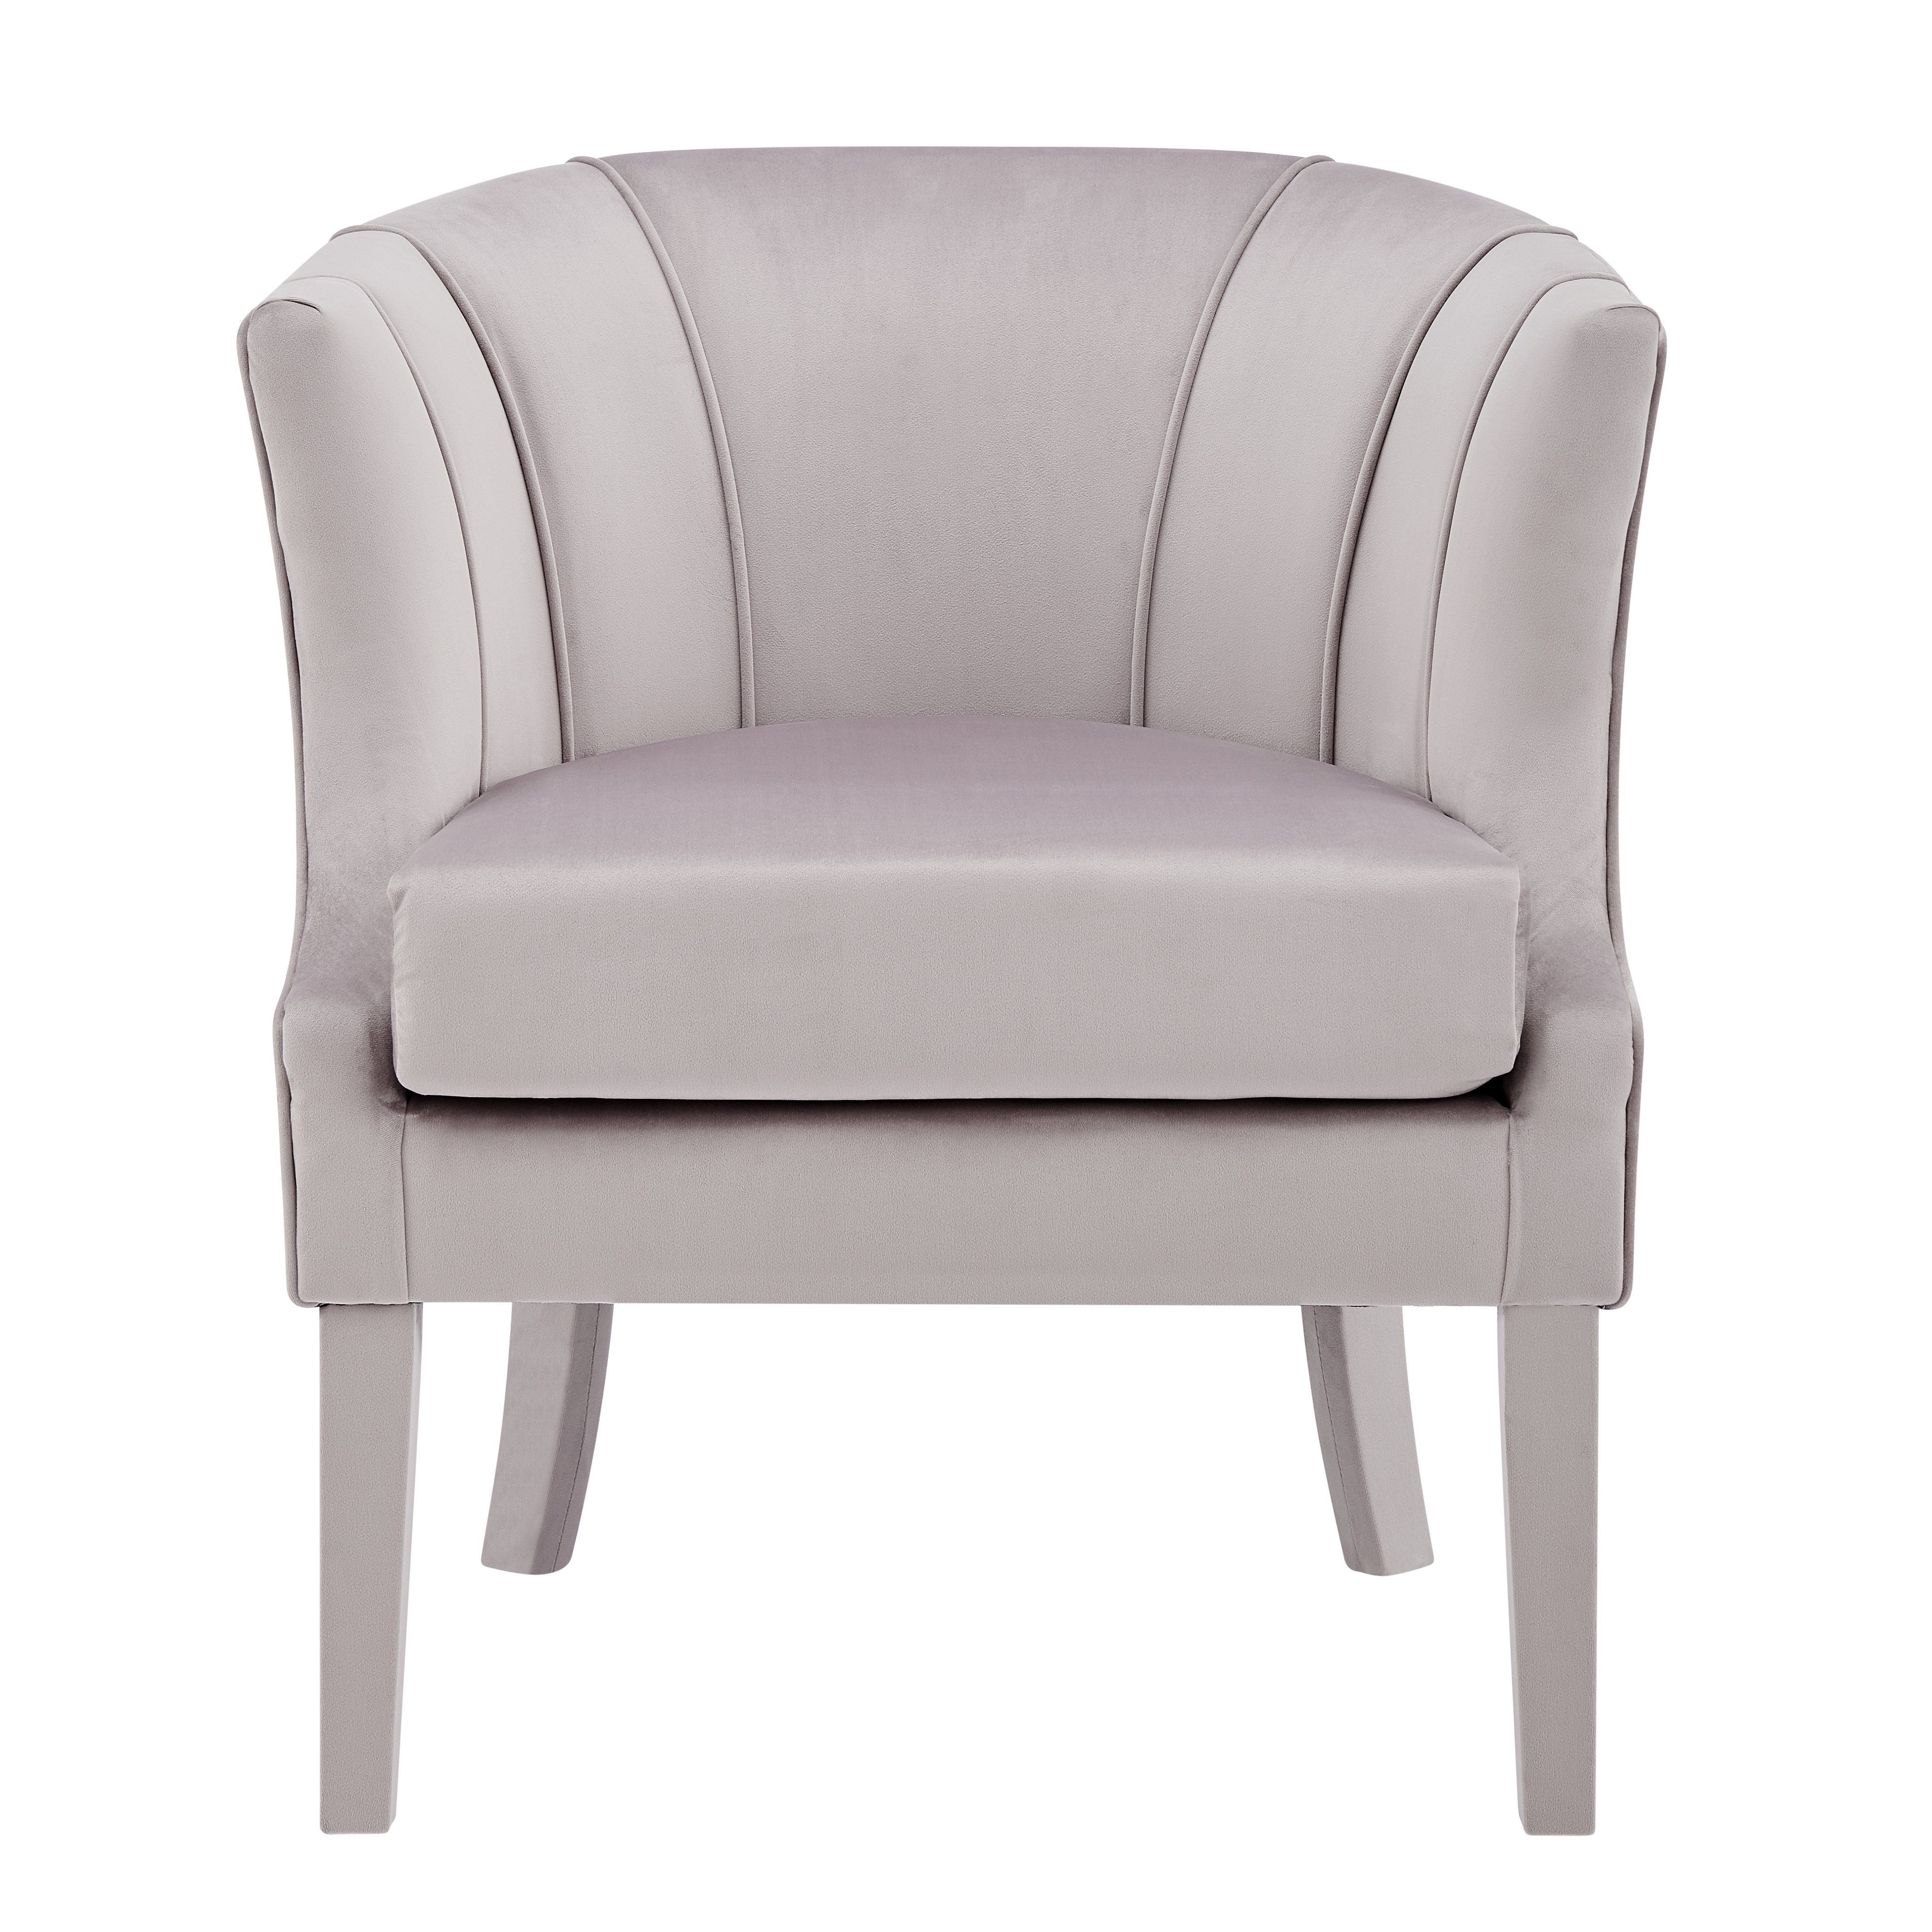 Iconic Home Layne Accent Chair Velvet Upholstered Vertical Channel Quilted Piped Stitching Barrel Back Design Upholstered Flared Legs - Grey